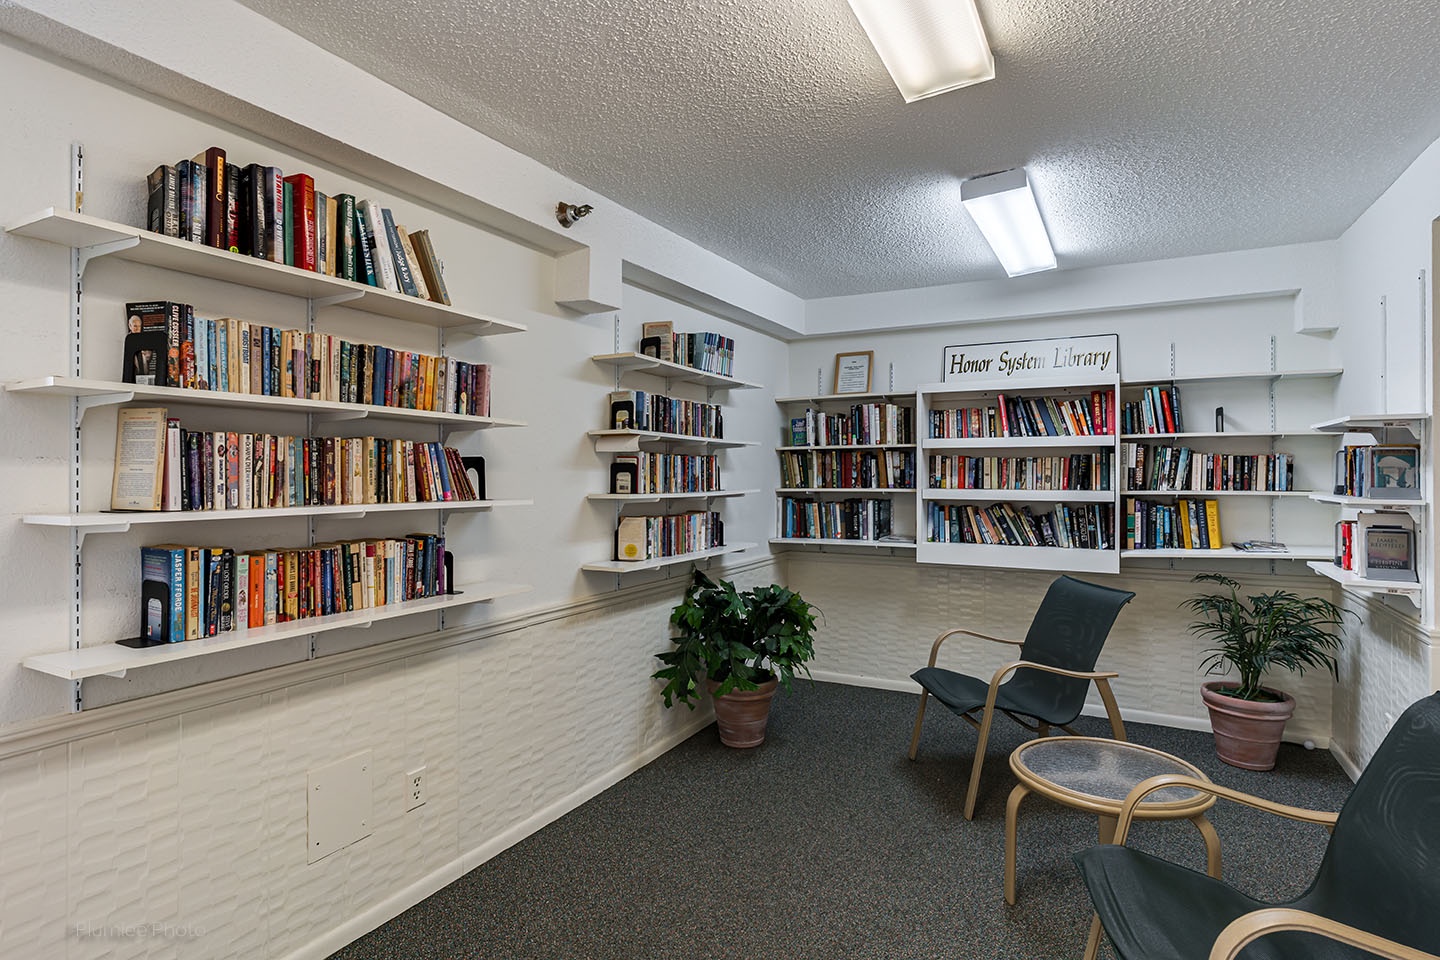 Community room lending library and reading area